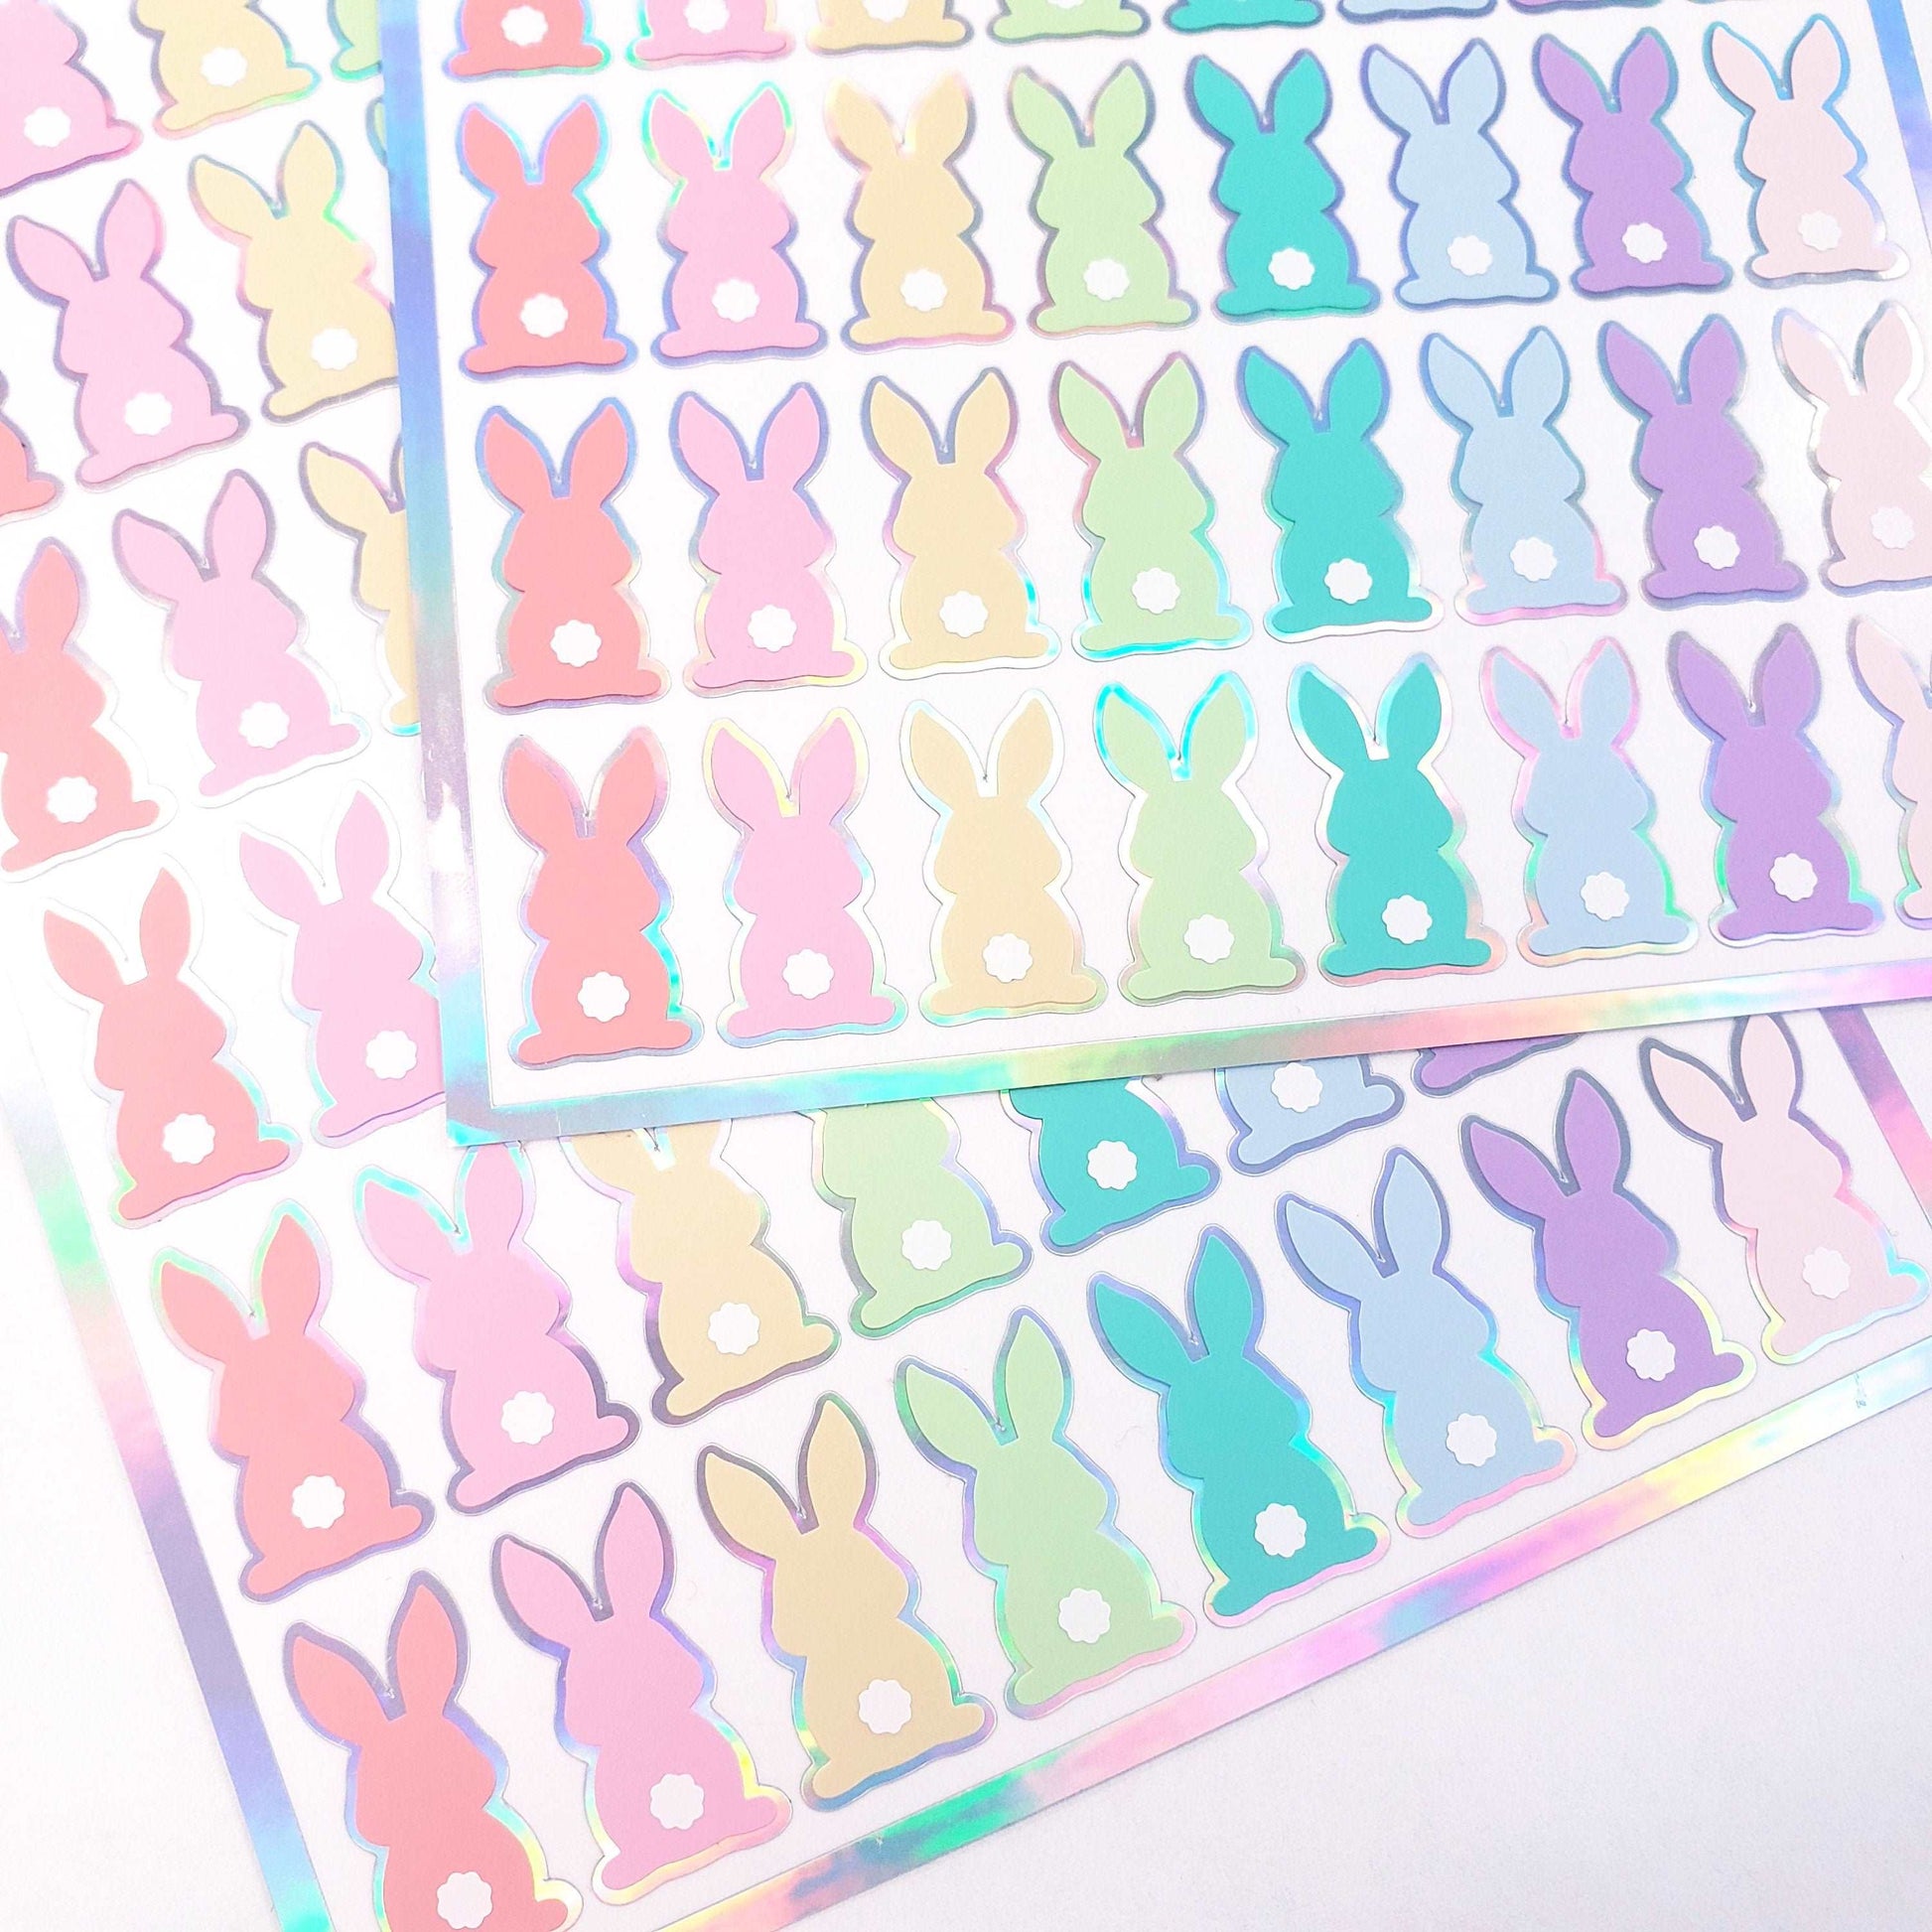 Pastel Bunny Stickers, set of 48 cute multi color pastel vinyl bunnies for Spring crafts, Easter baskets and Mother's Day cards.